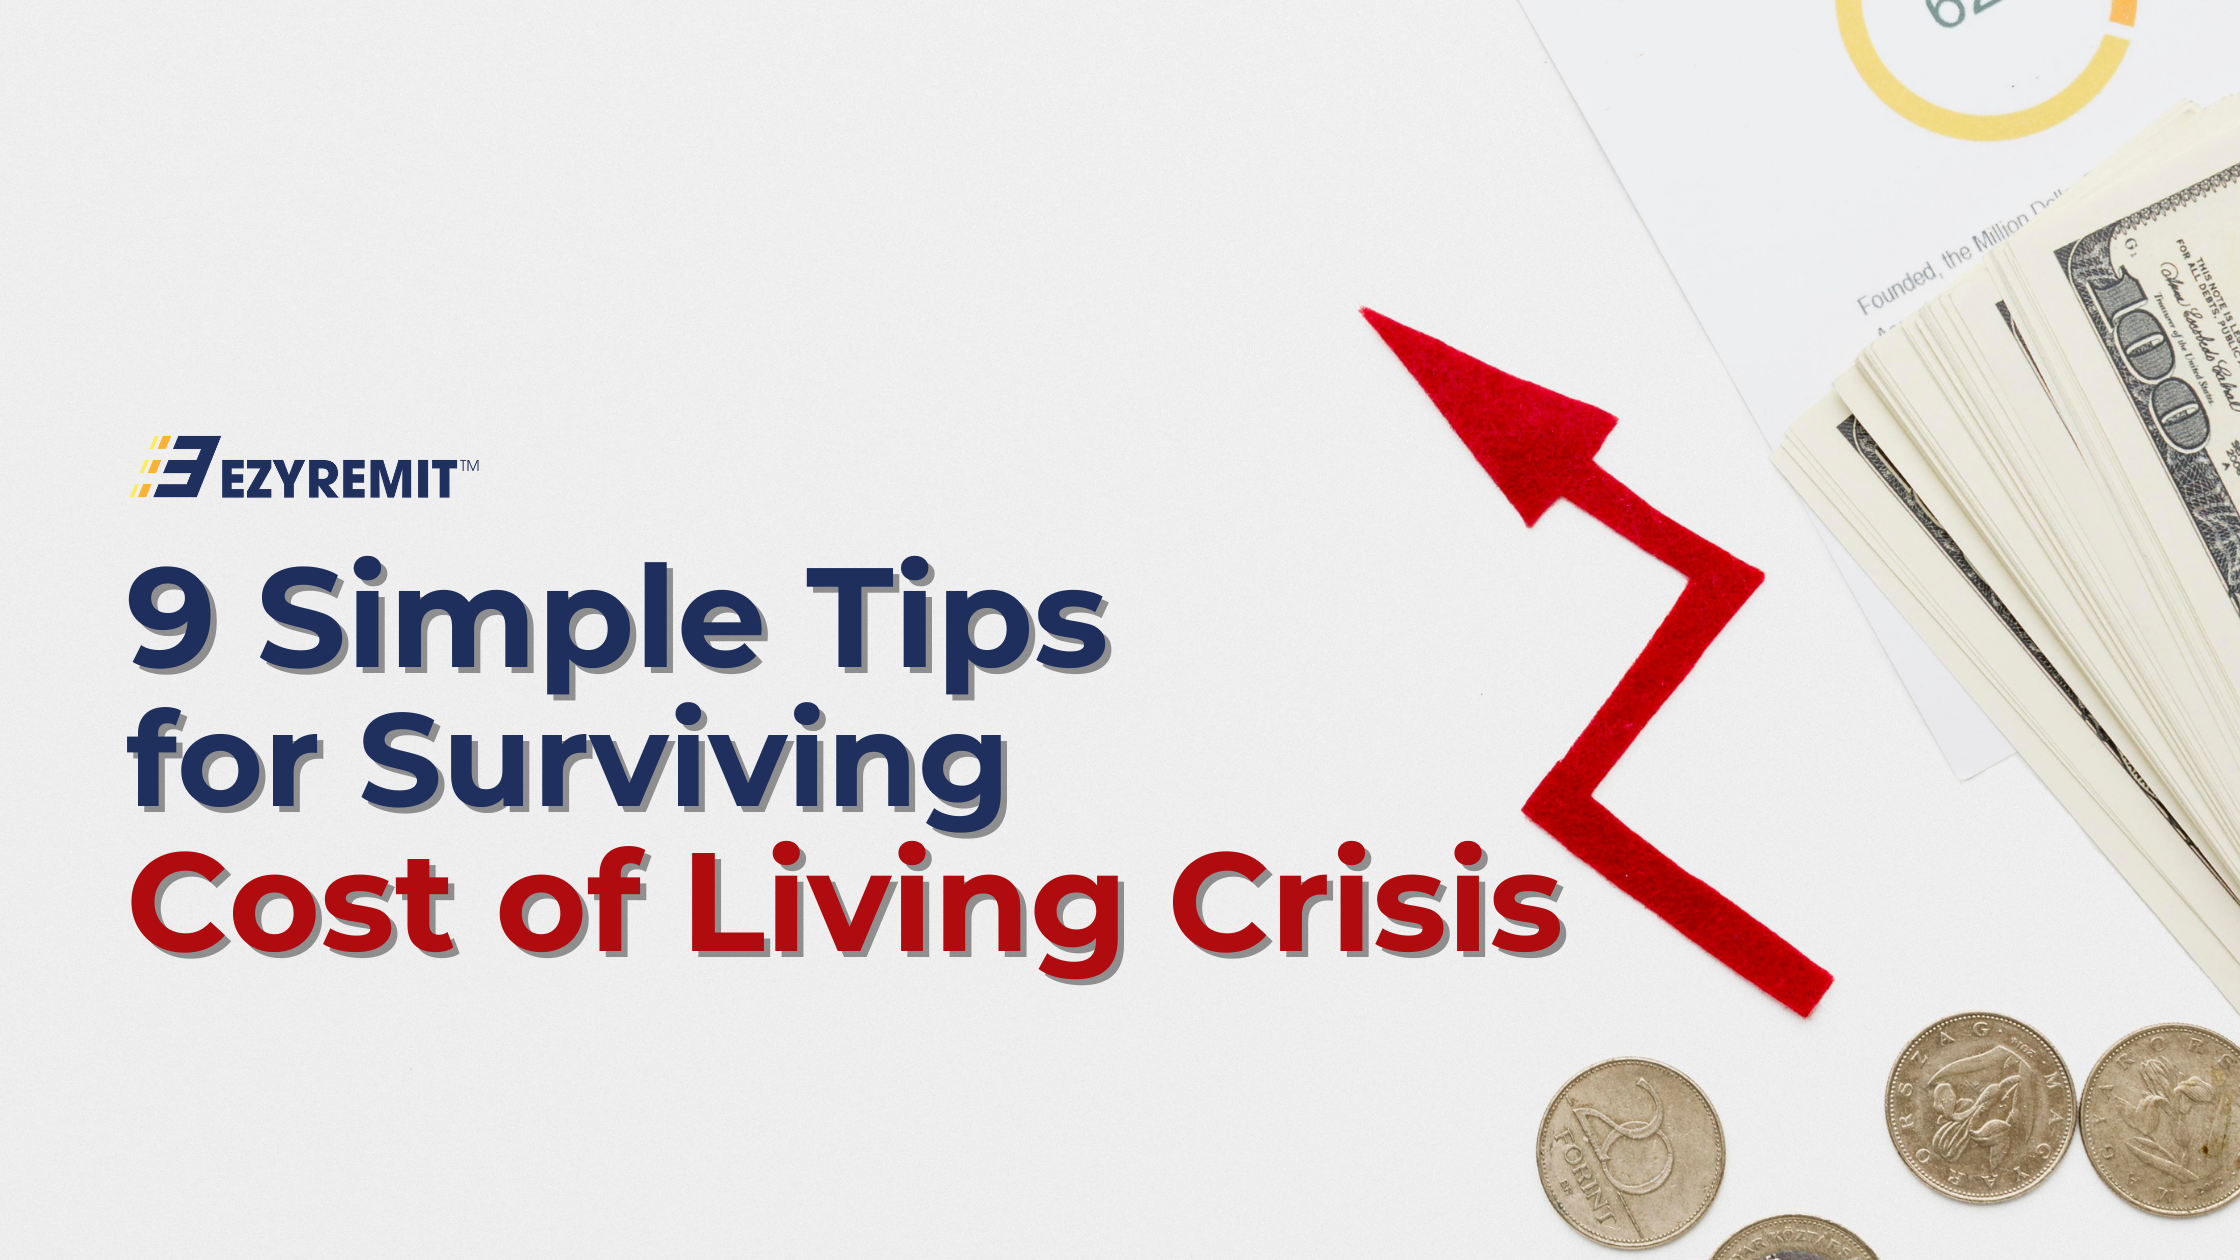 9 Simple Tips for Surviving the Cost of Living Crisis